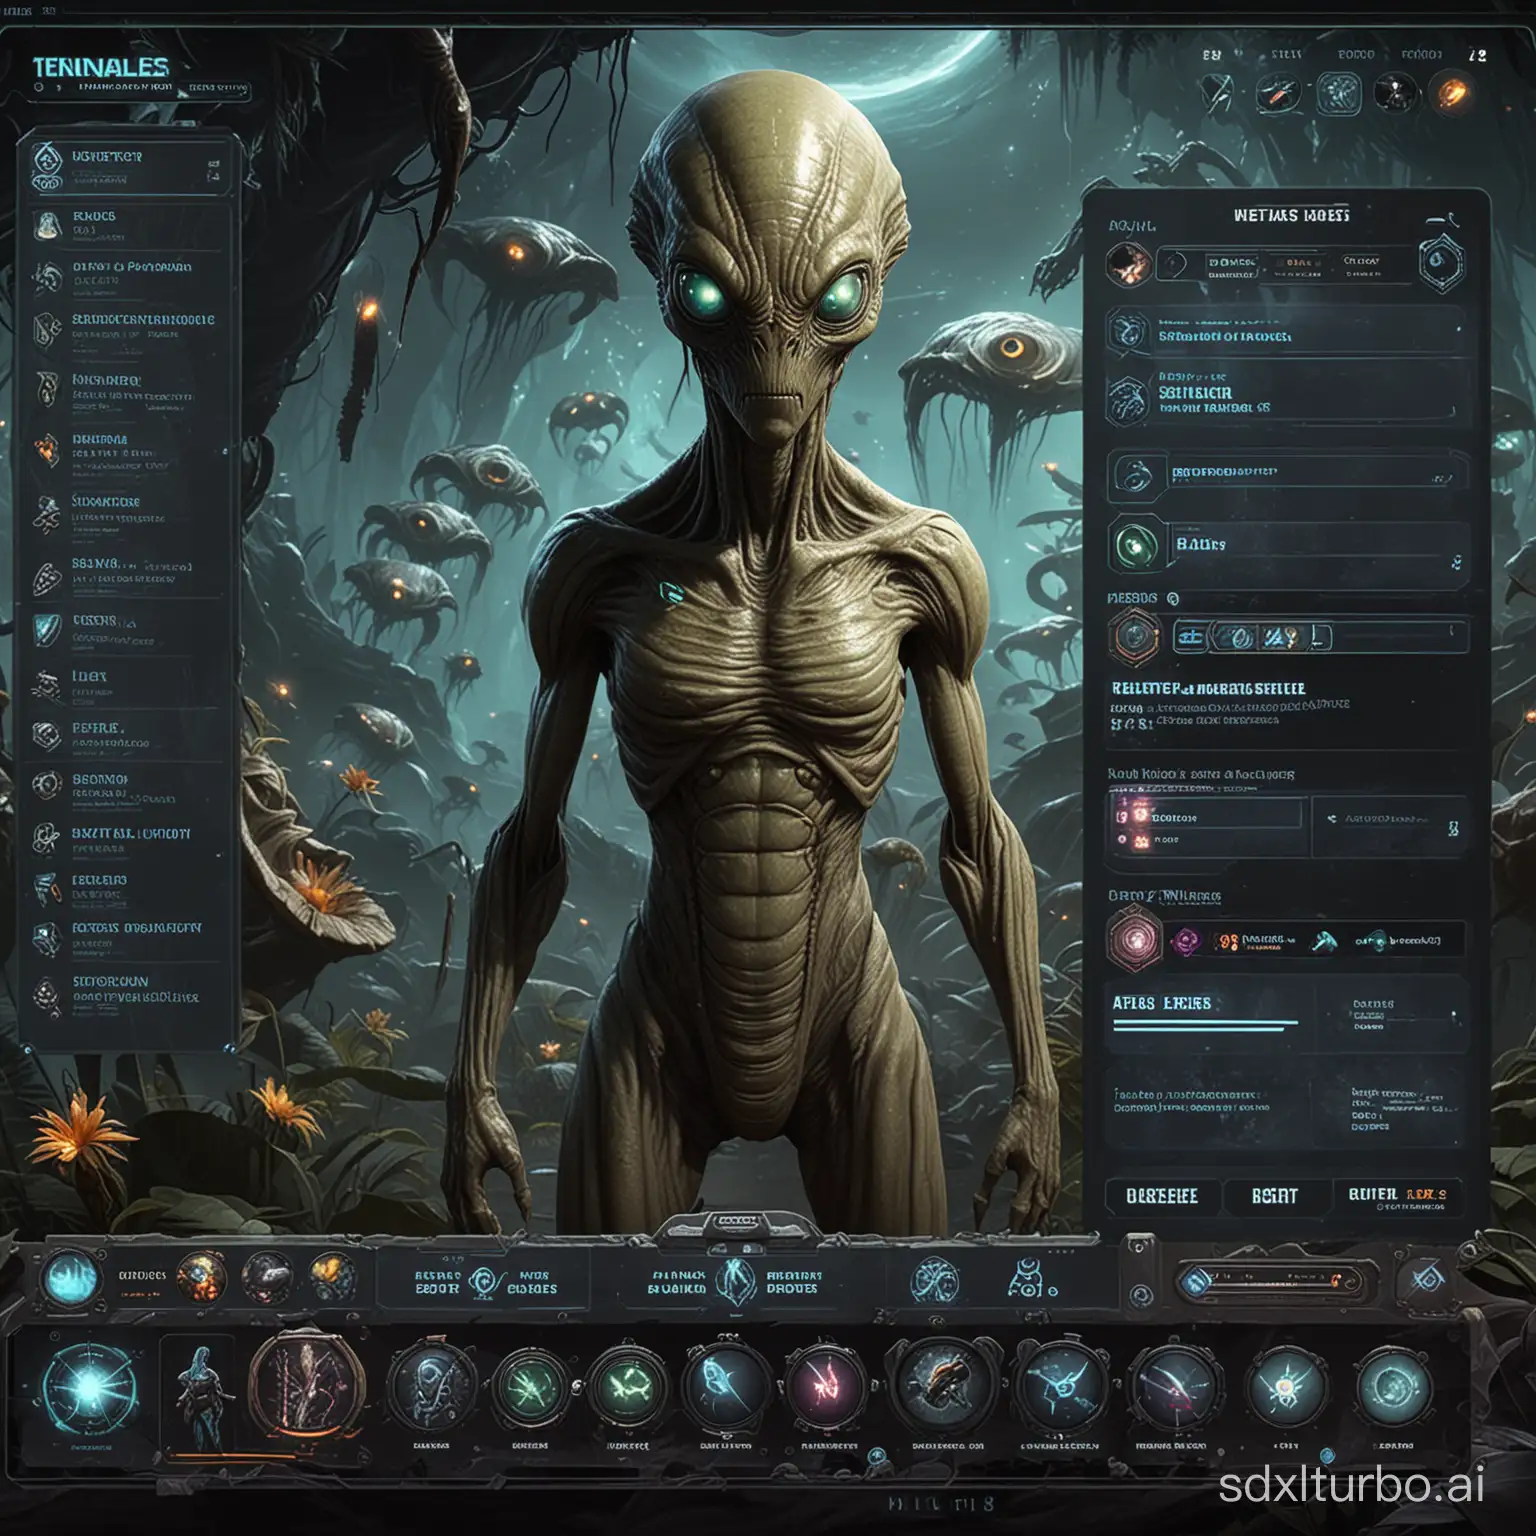 A combat interface for an an Alien Lifeform with many eyes and tentecales 2 game that requires a avatar and health bar and a mini map and team information and skill buttons